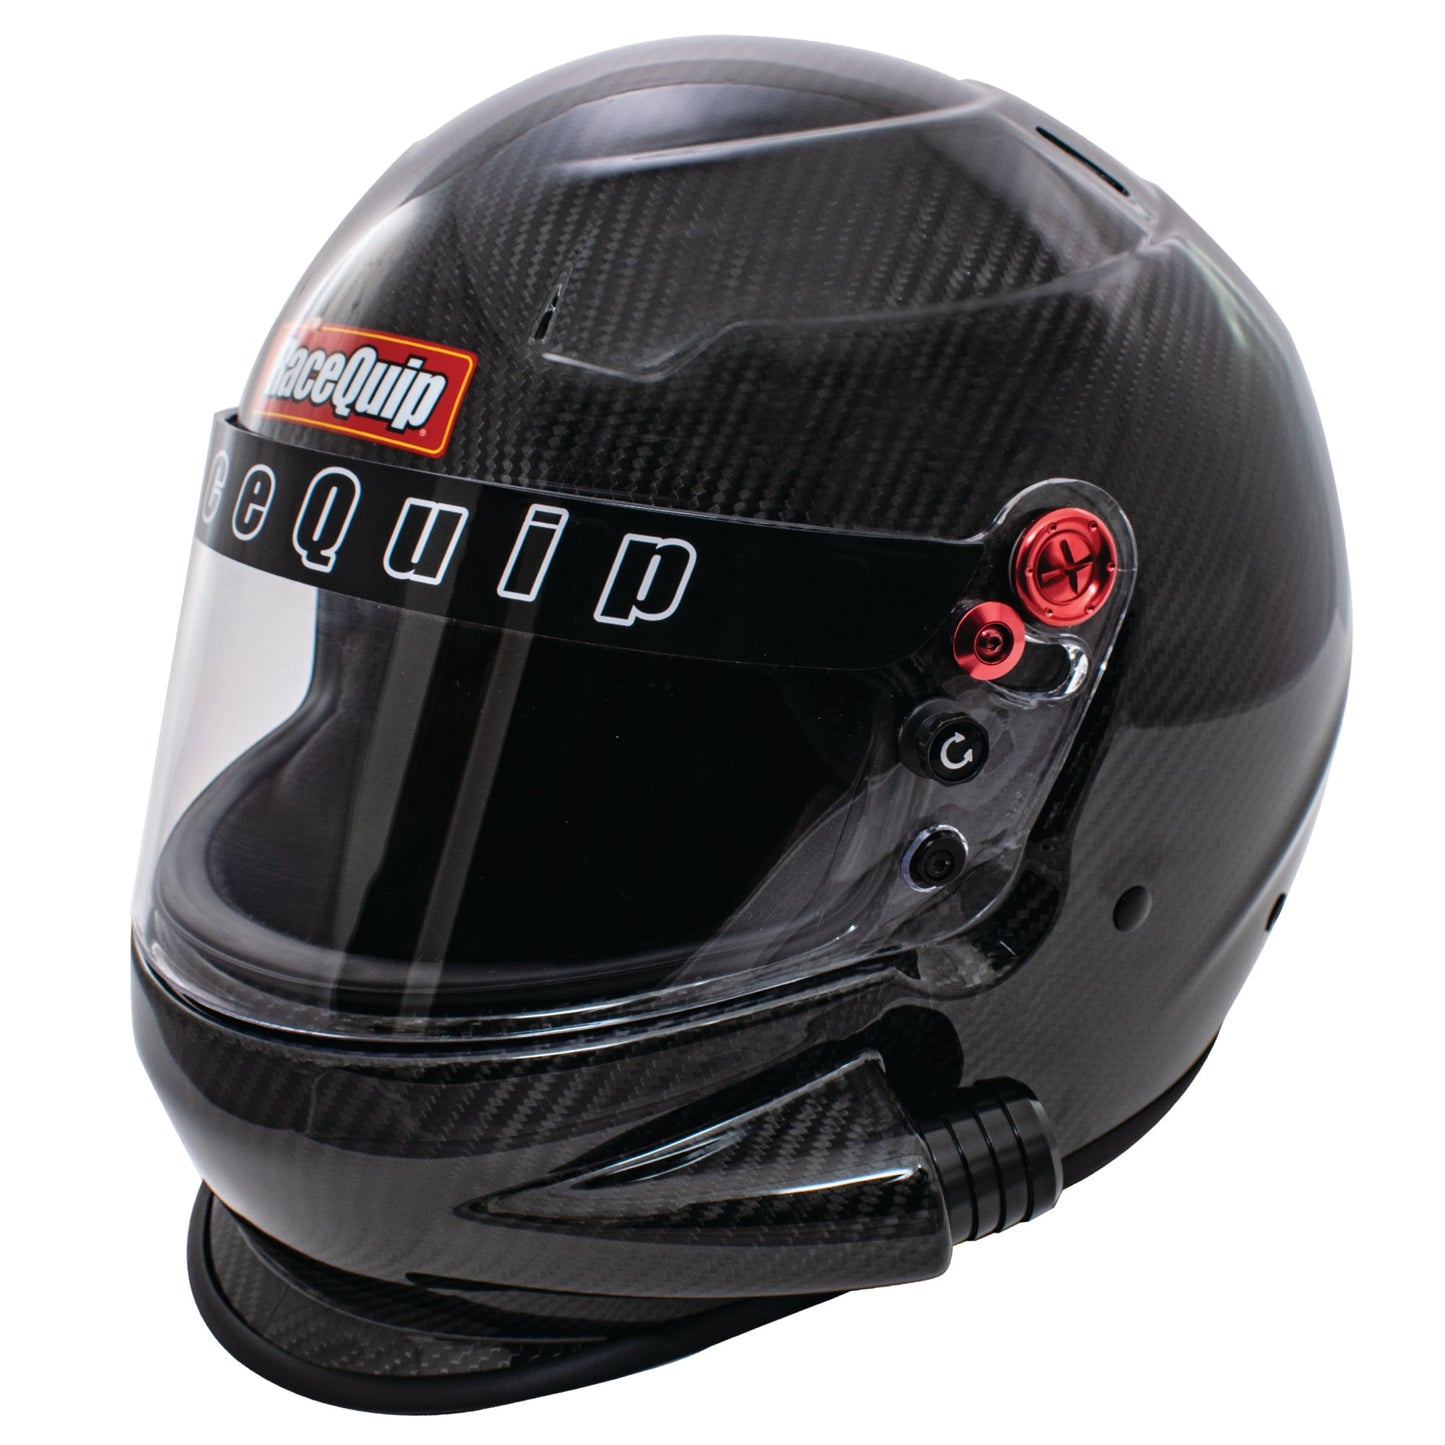 RaceQuip - PRO20 Side Air Helmet Snell SA2020 Rated Carbon Fiber